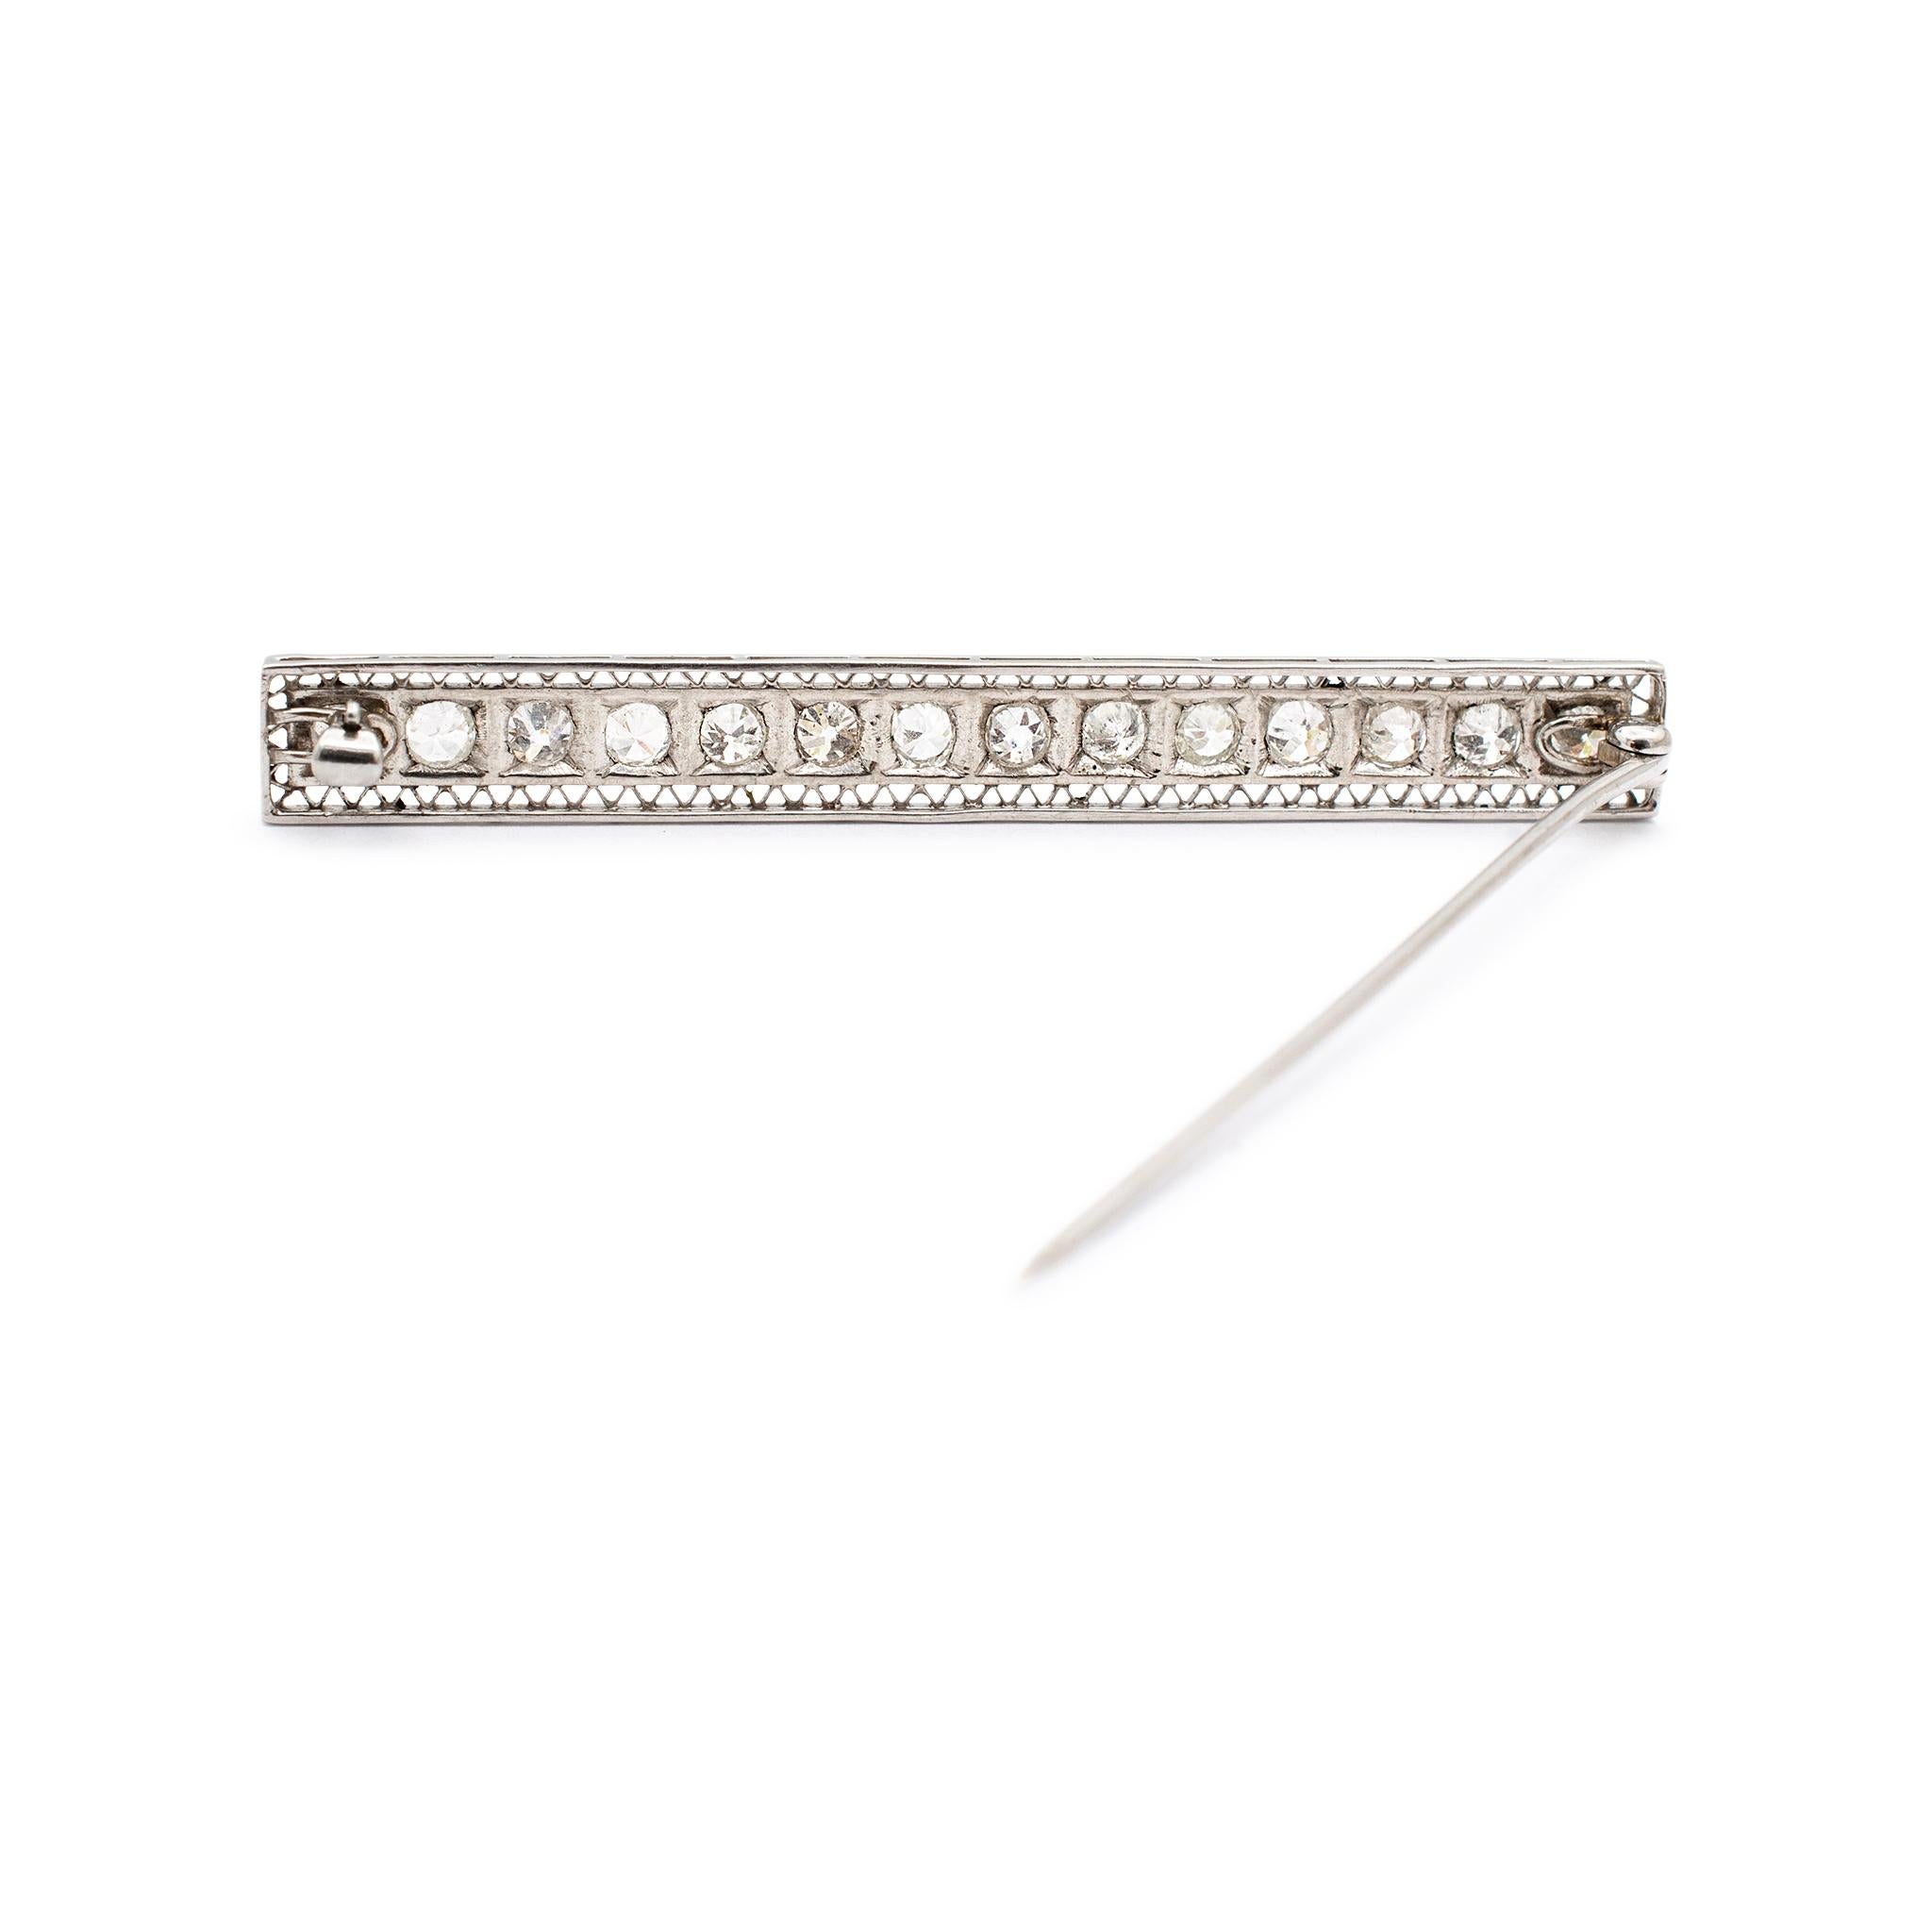 Gender: Unisex

Metal Type: Platinum & 14K White Gold

Length: 2.50 inches

Width: 7.50 mm

Weight: 8.50 grams

 Platinum and 14K white gold diamond antique brooch. The metals were tested and determined to be platinum and 14 Karat white gold. In